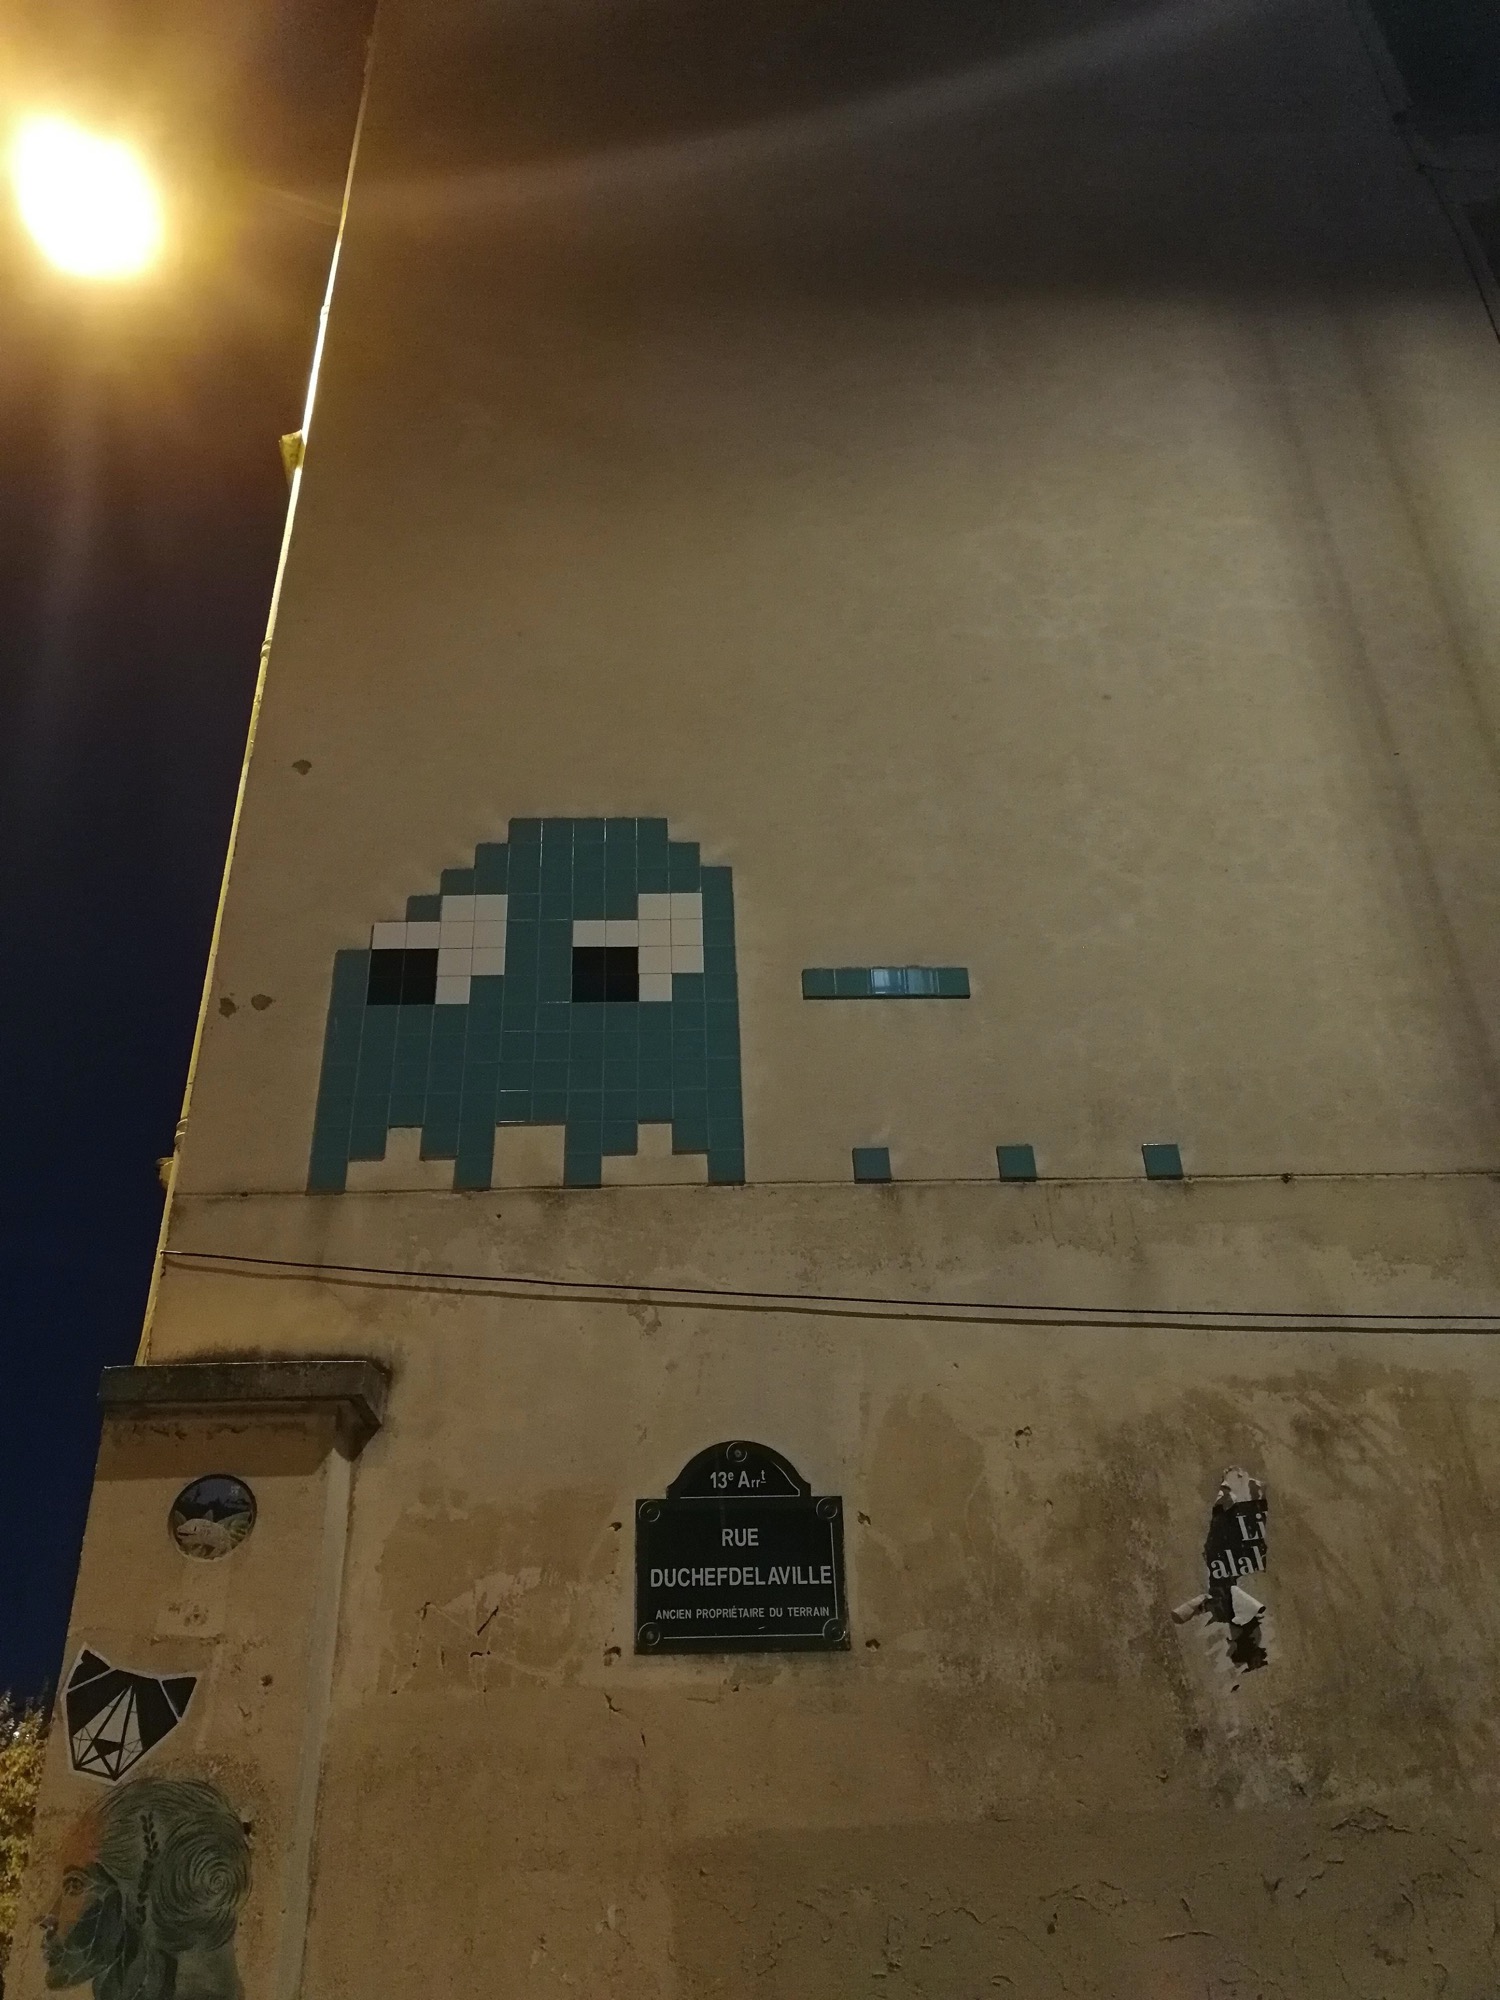 Mosaic 3253  by the artist Invader captured by Rabot in Paris France